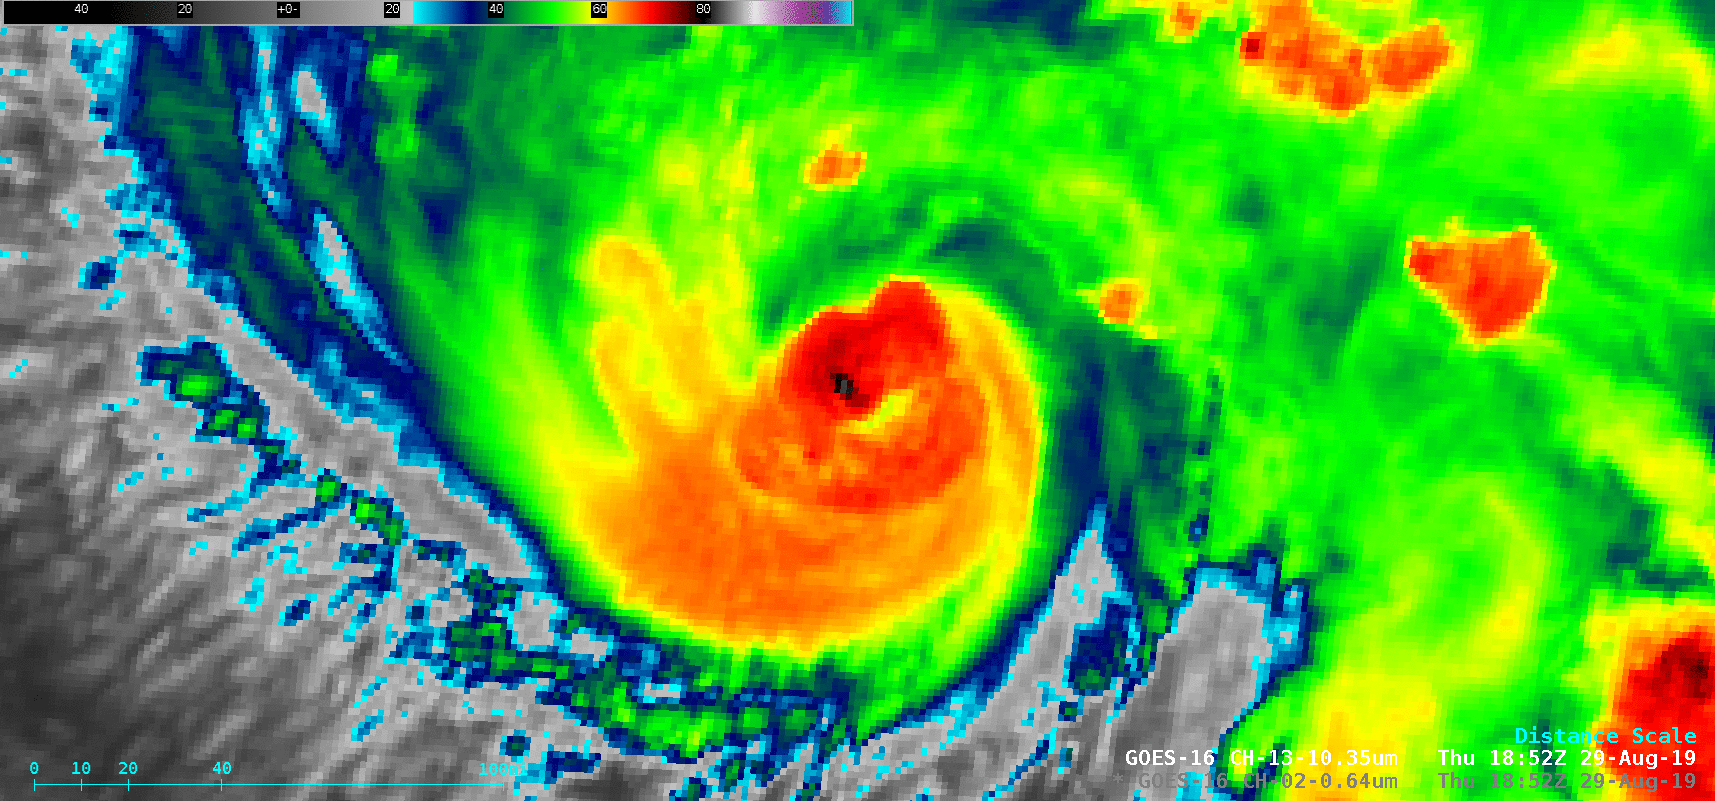 GOES-16 “Clean” Infrared Window (10.35 µm) image at 1853 UTC, with and without an overlay of GLM Flash Extent Density [click to enlarge]